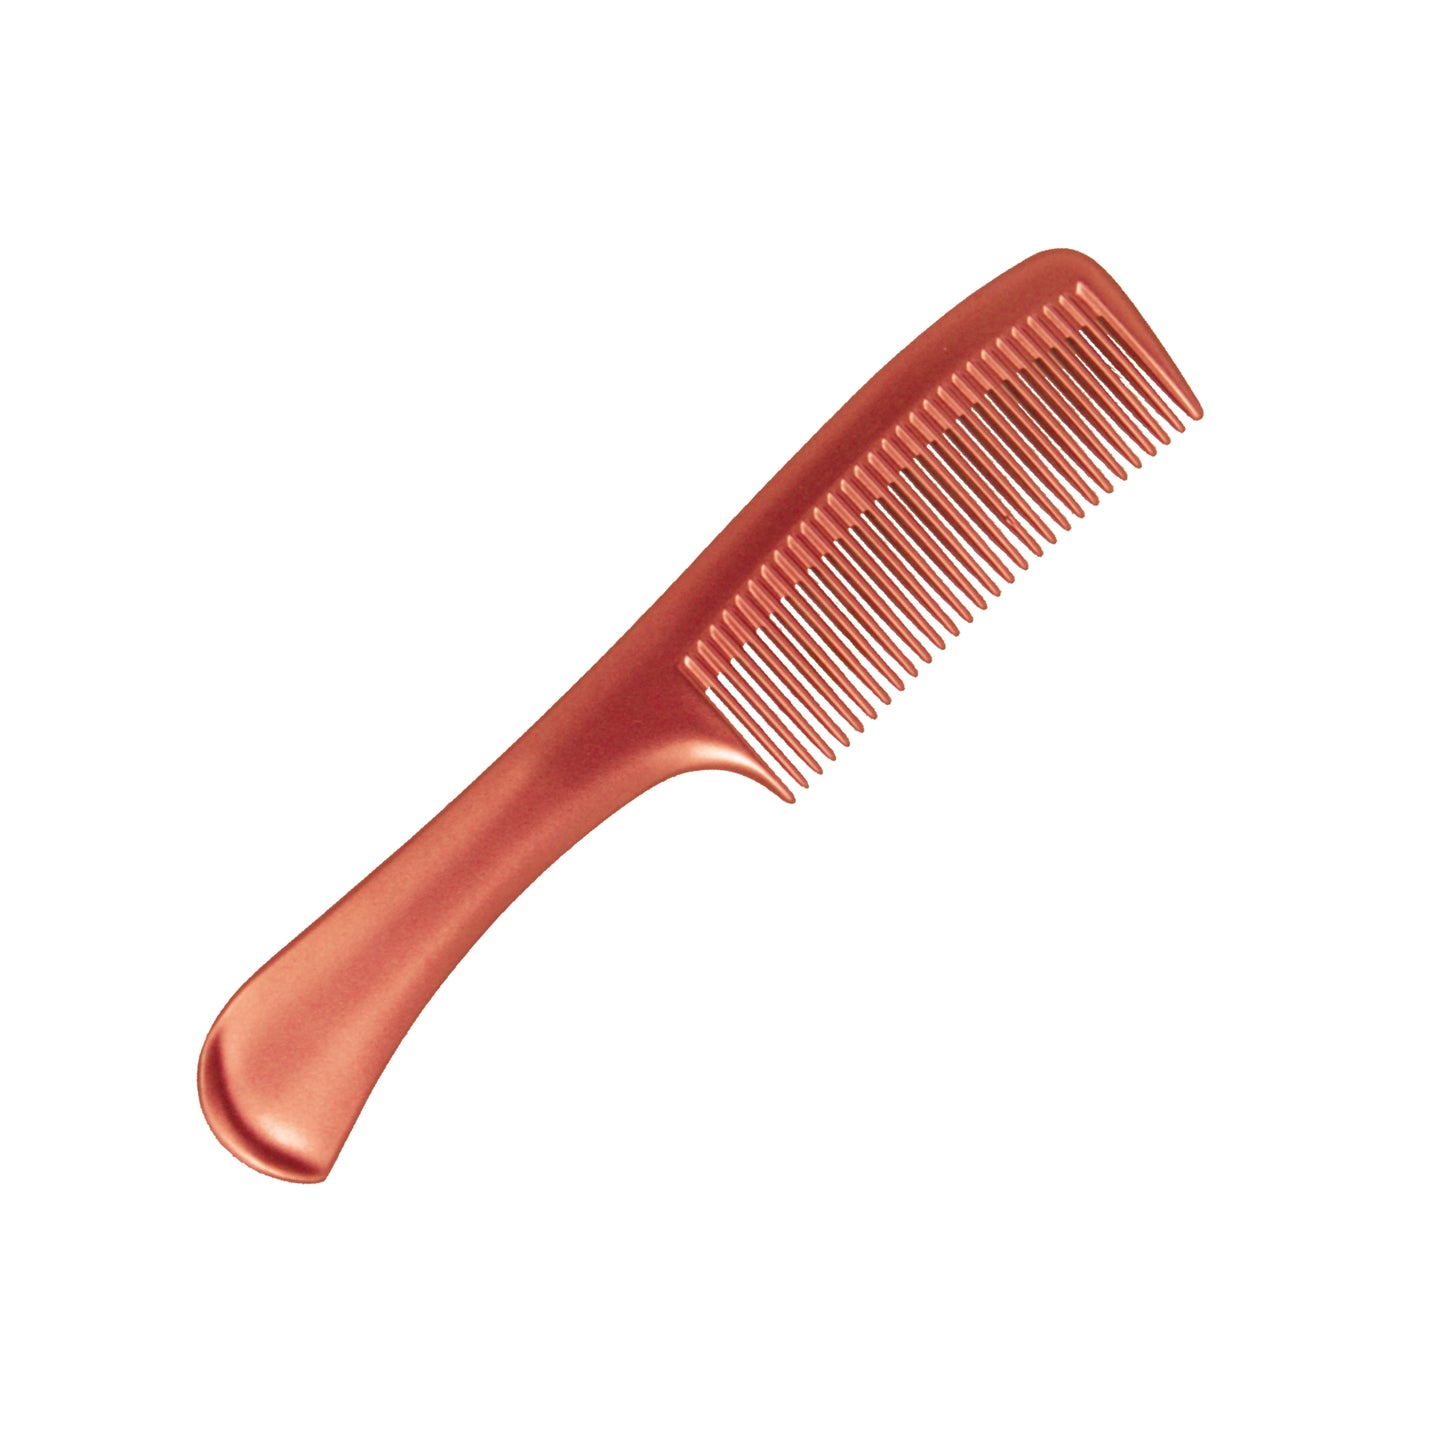 Pegasus MICOLOR 501, 9in Hard Rubber Handle Comb, Handmade, Seamless, Smooth Edges, Anti Static, Heat and Chemically Resistant, Wet Hair, Everyday Grooming Comb | Peines de goma dura - Copper